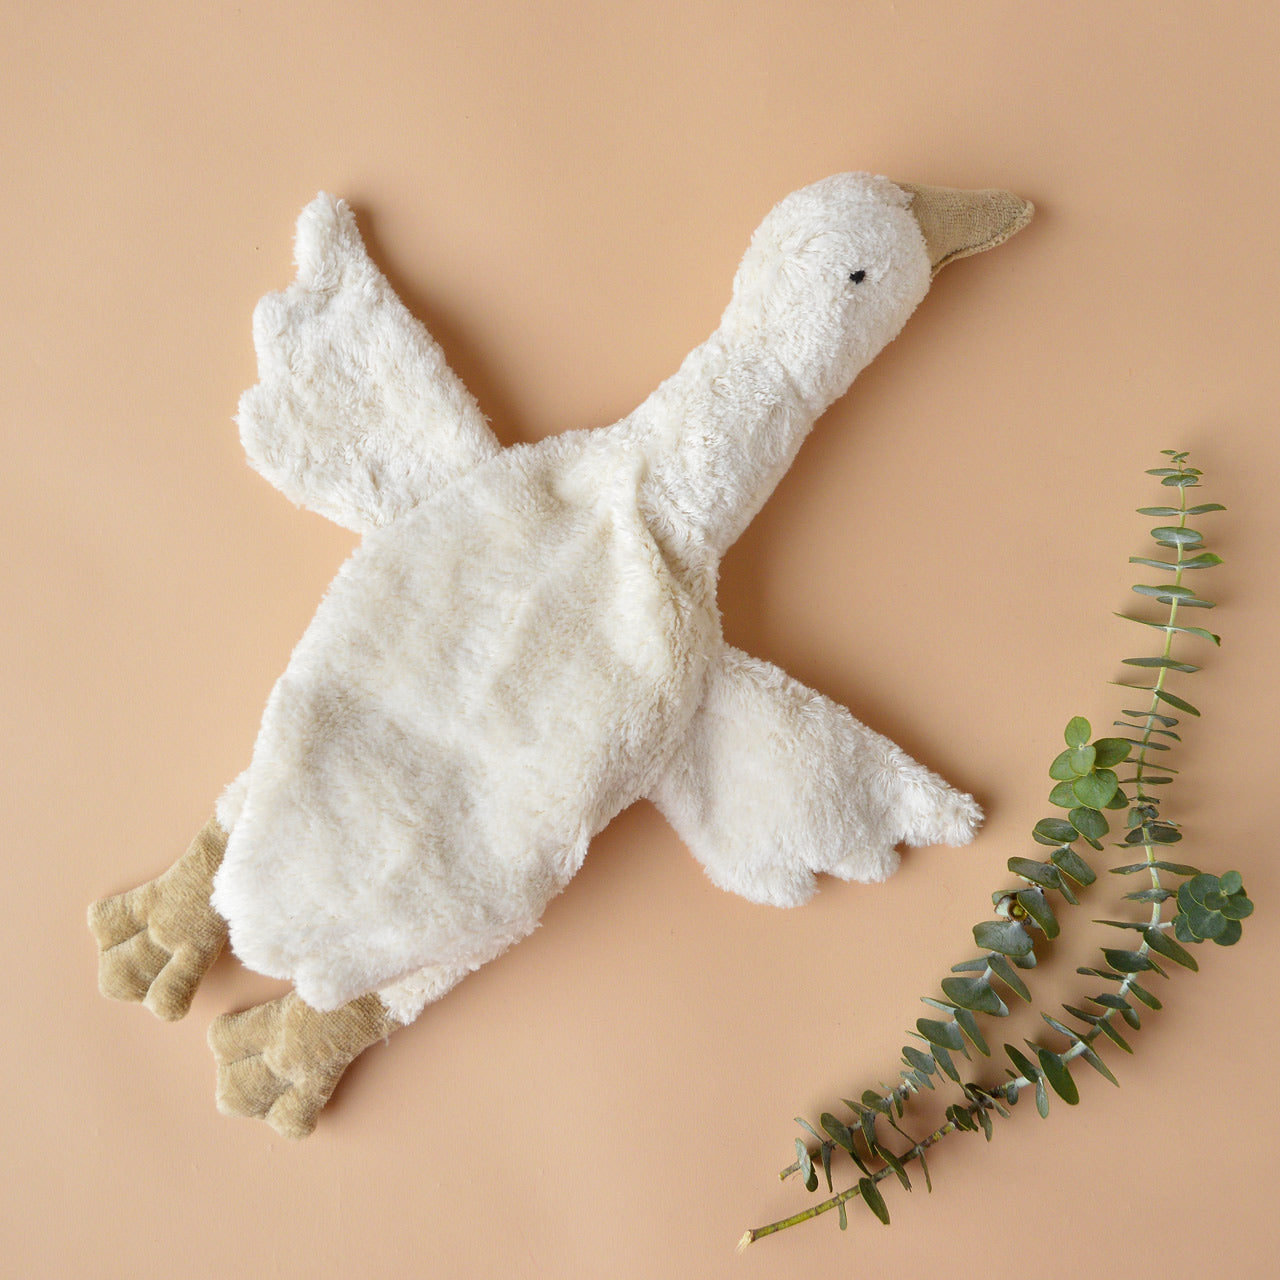 Cuddly Goose Toy/Heat Pack in Organic Cotton/Lambswool - Small